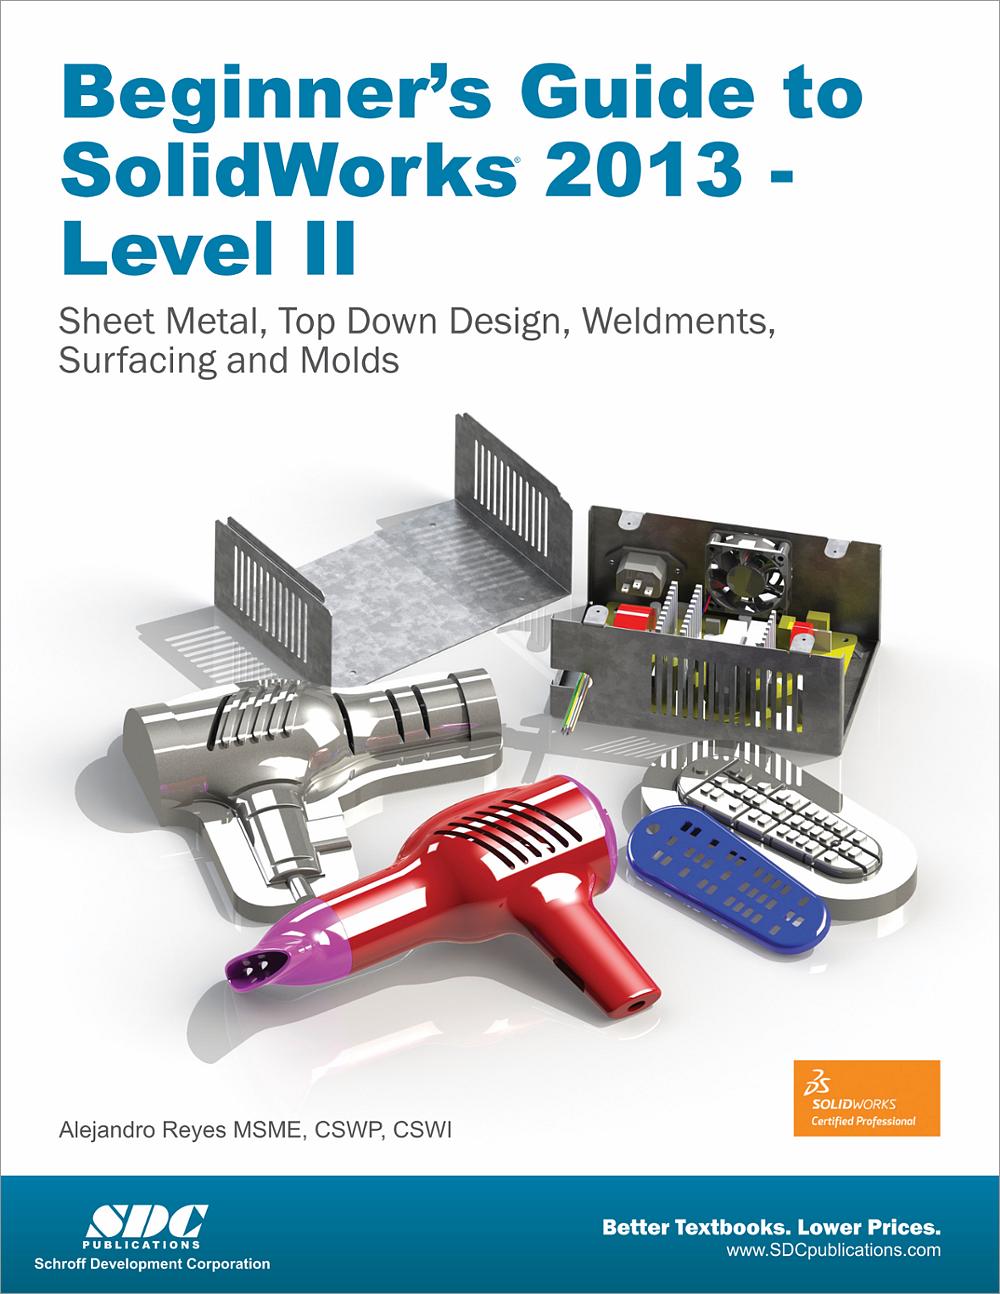 solidworks books for beginners pdf free download